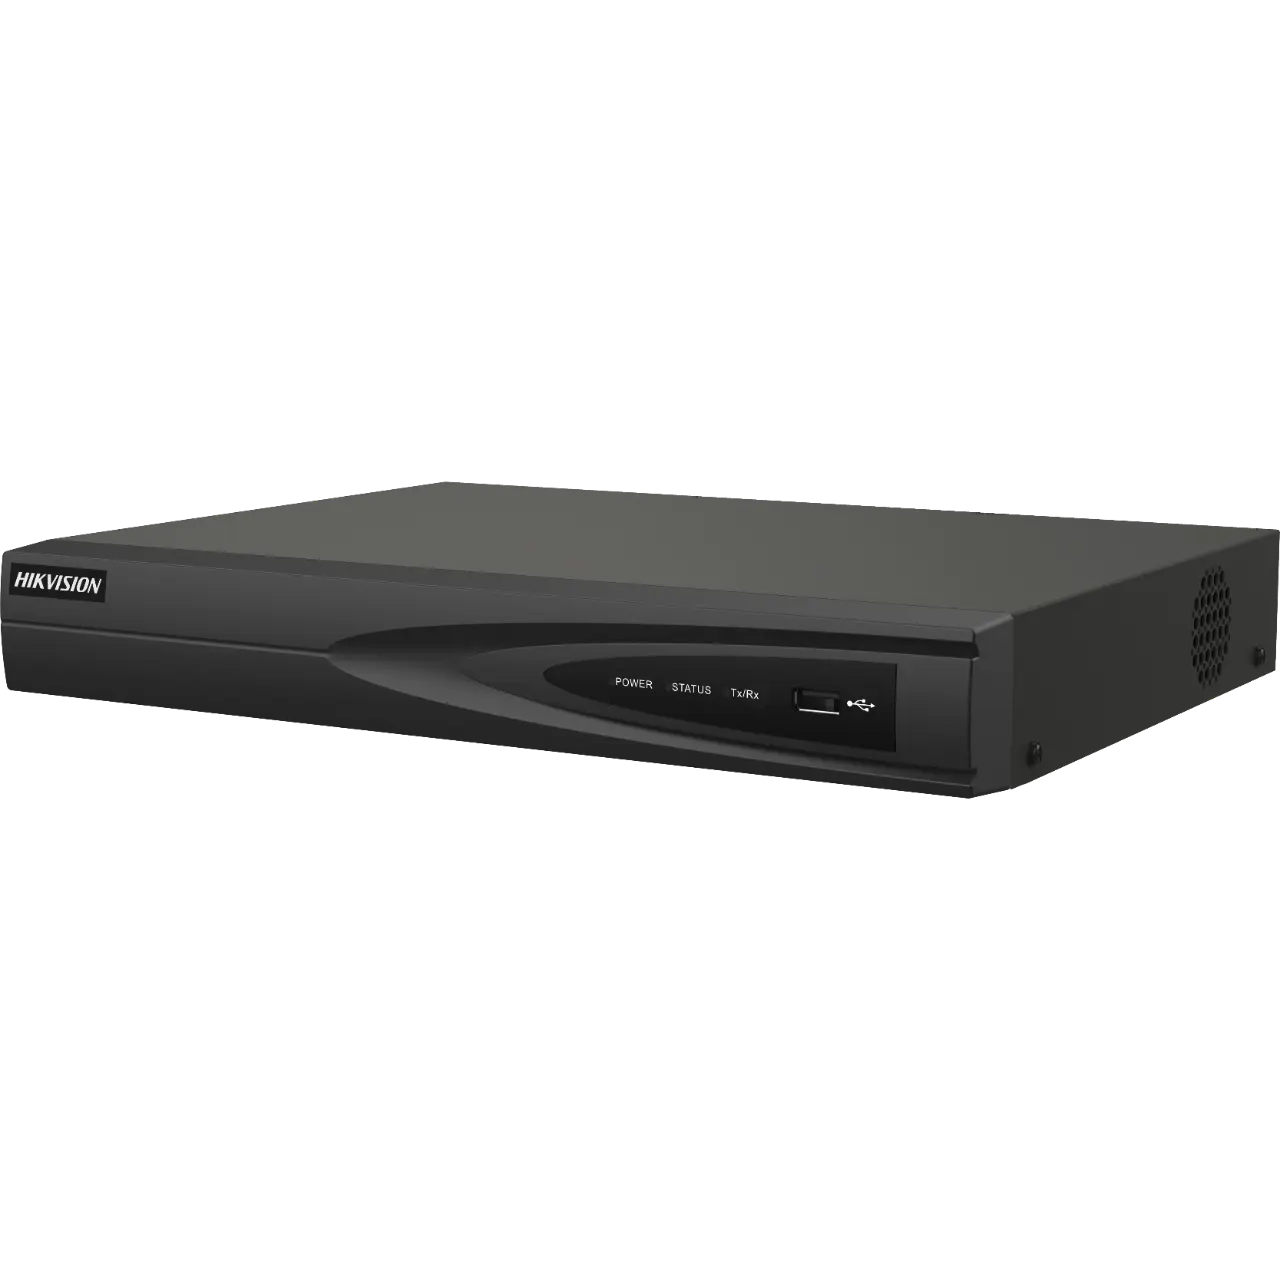 Hikvision DS-7616NI-K1 NVR Network Video Recorder, H.265+/H.265/H.264+/H.264 Video Formats, 16-ch IP Camera Inputs, 160 Mbps Bandwidth, Affordable Price